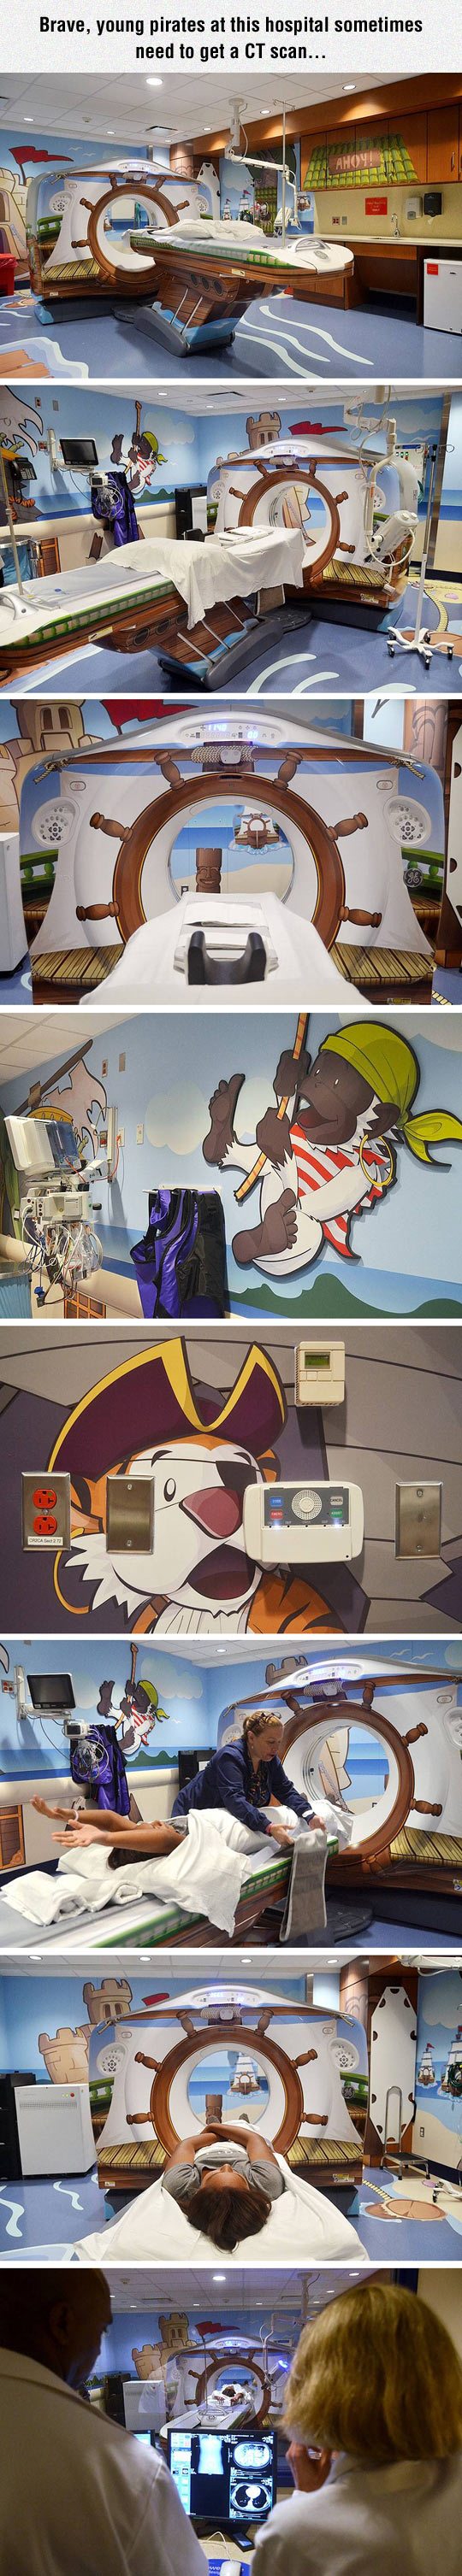 Brave young pirates sometimes need CT Scans too.